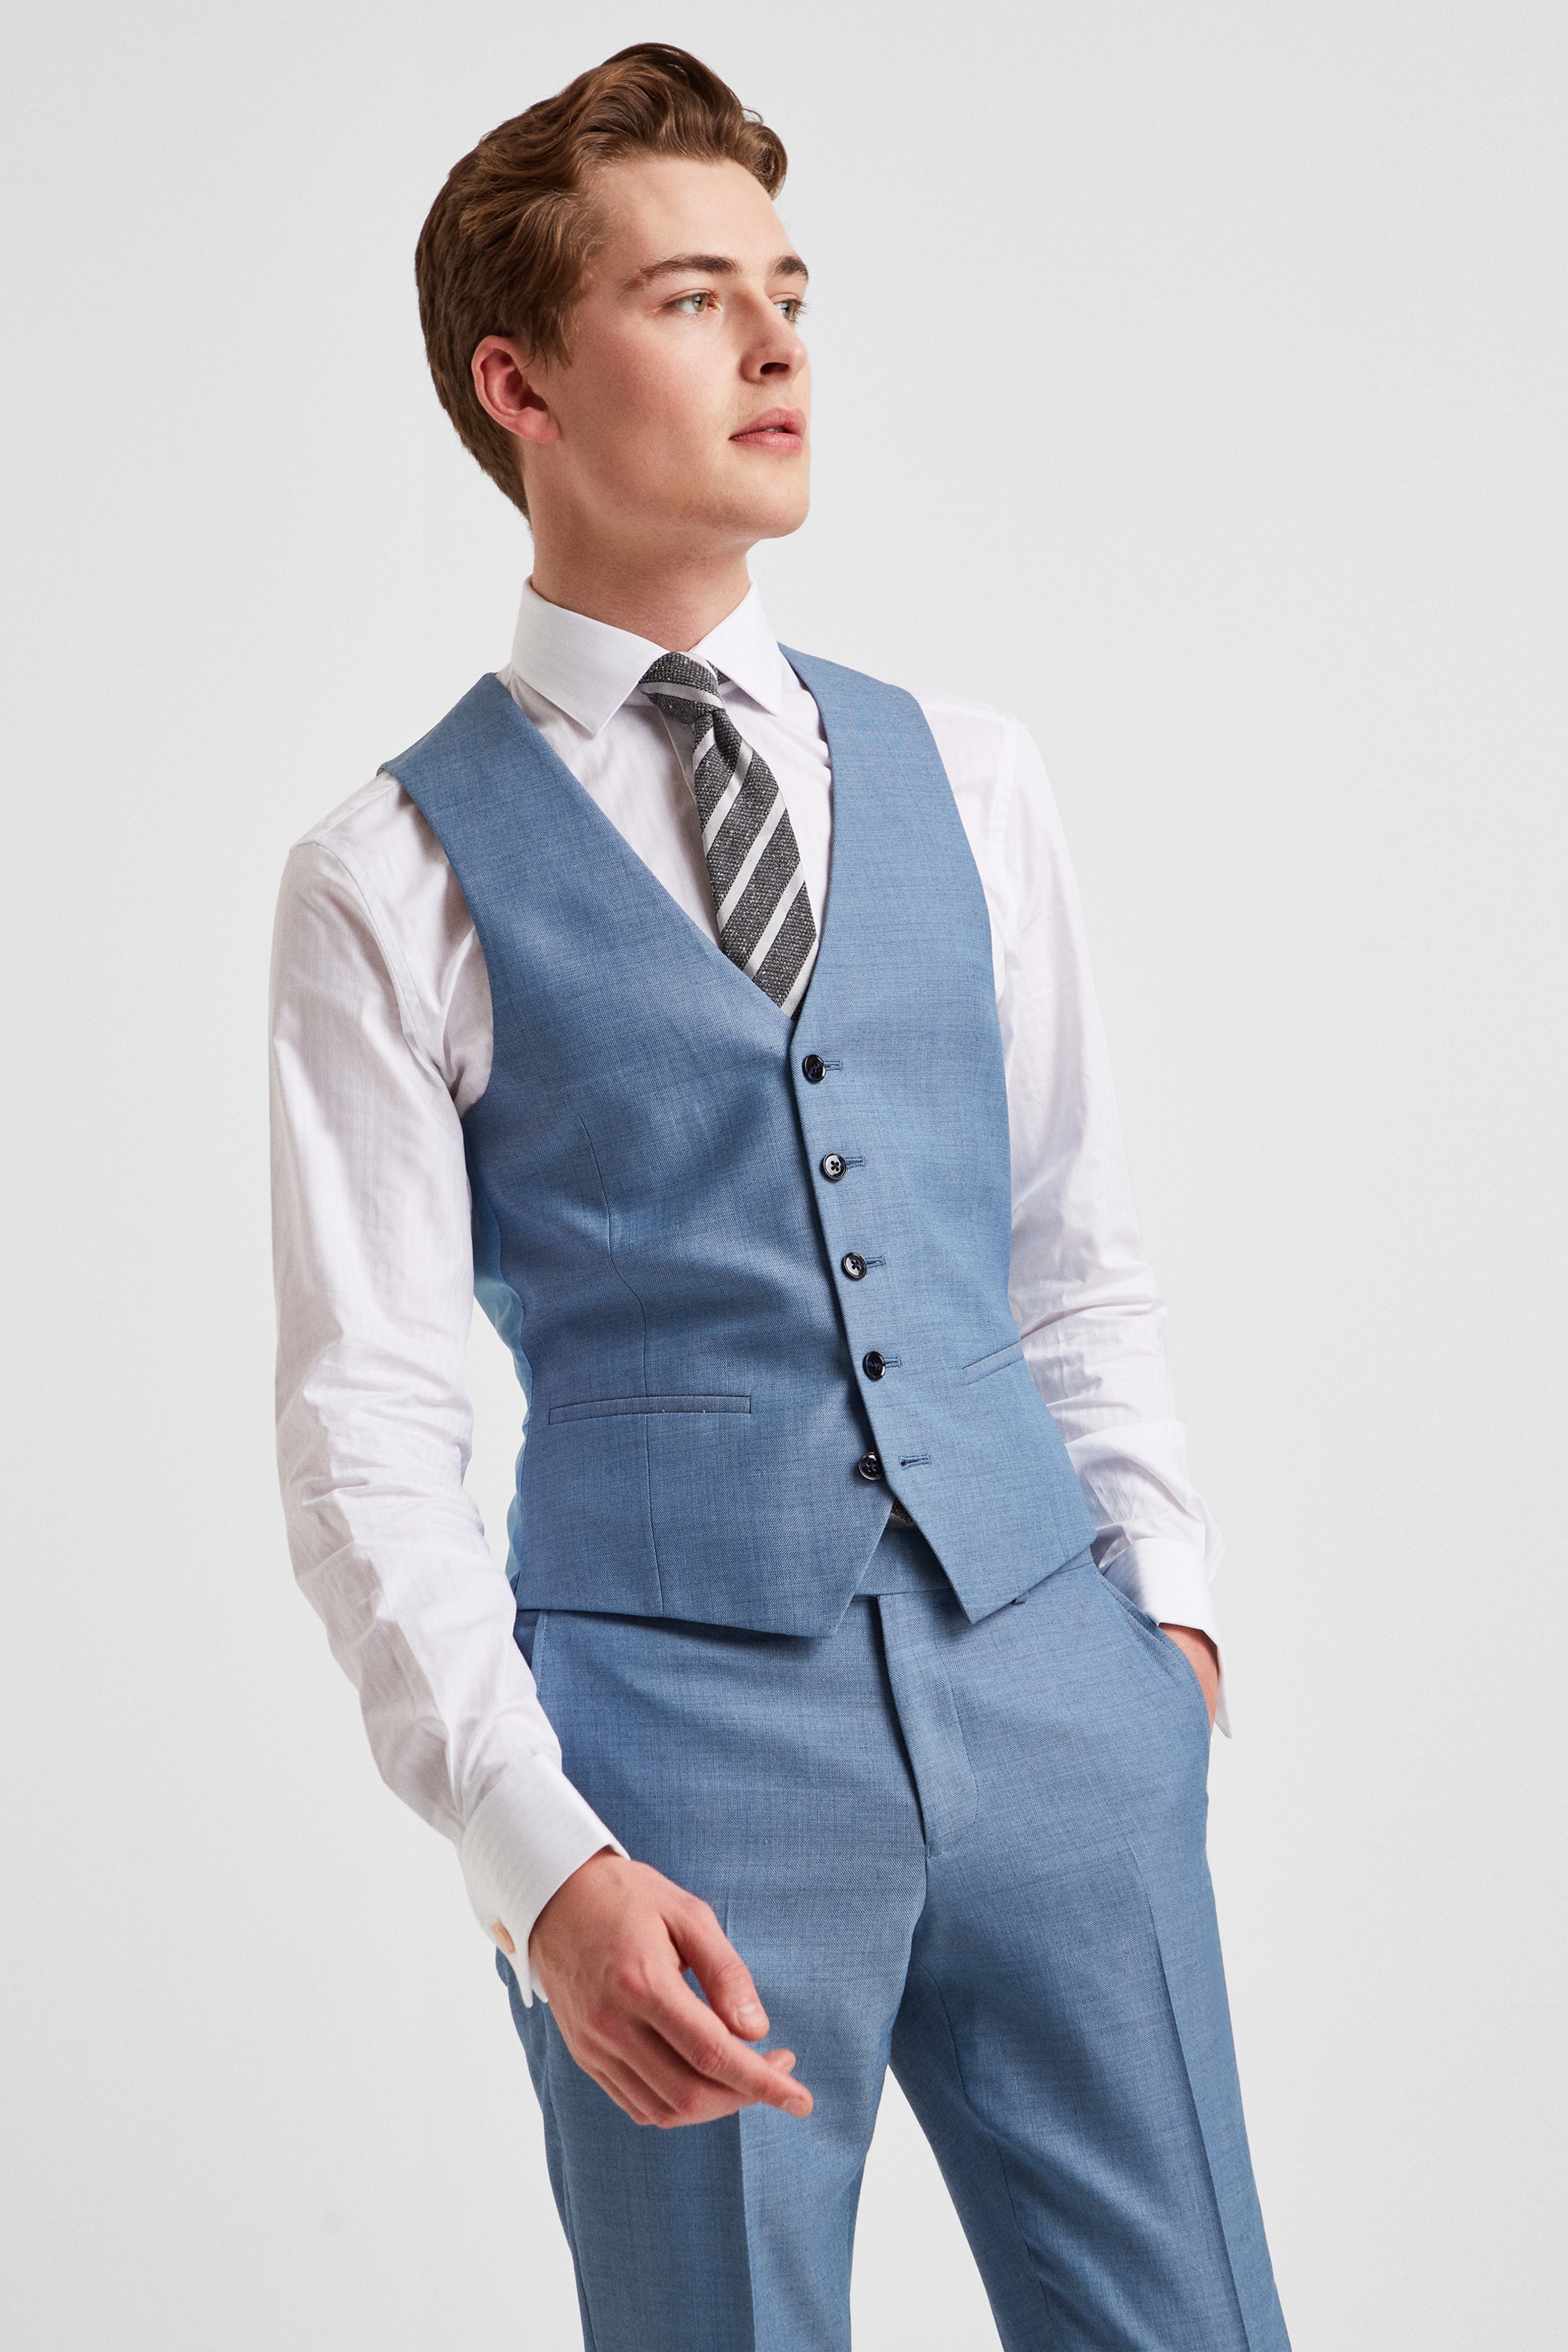 This slim fit navy blue suit with a grey waistcoat is a goto outfit for  almost any occasion Pr  Blue suit grey waistcoat Wedding suits men  grey Navy blue suit